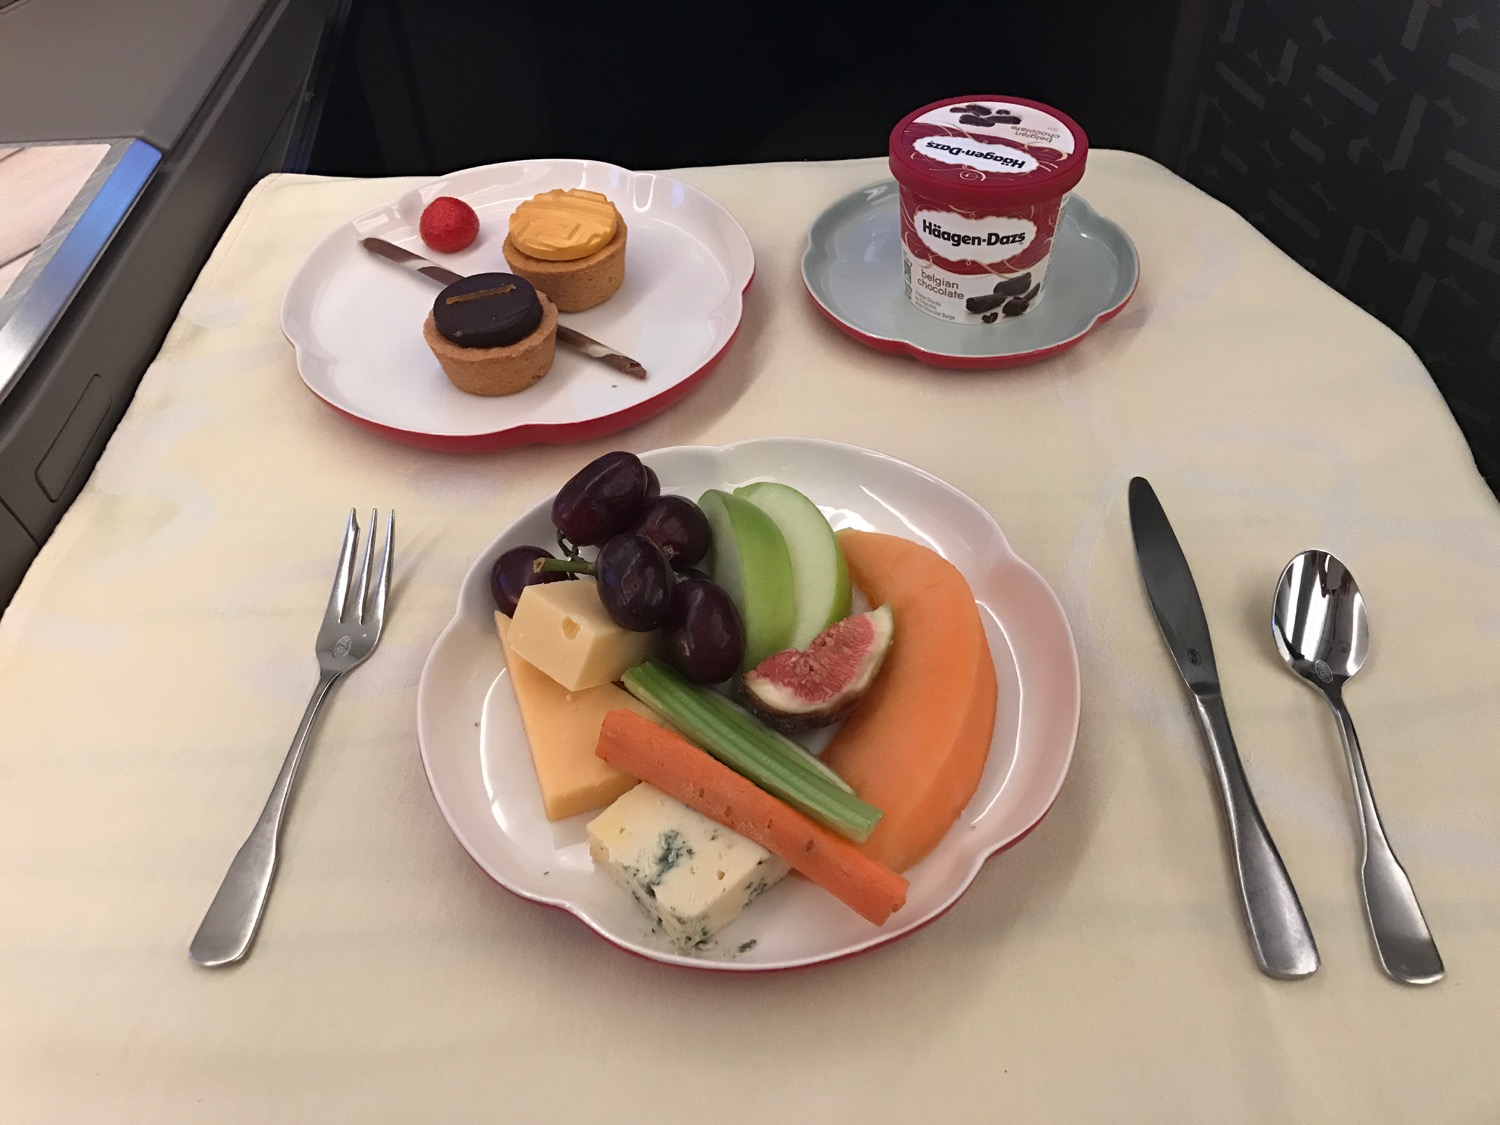 China Airlines A350 Business Class Review - 72